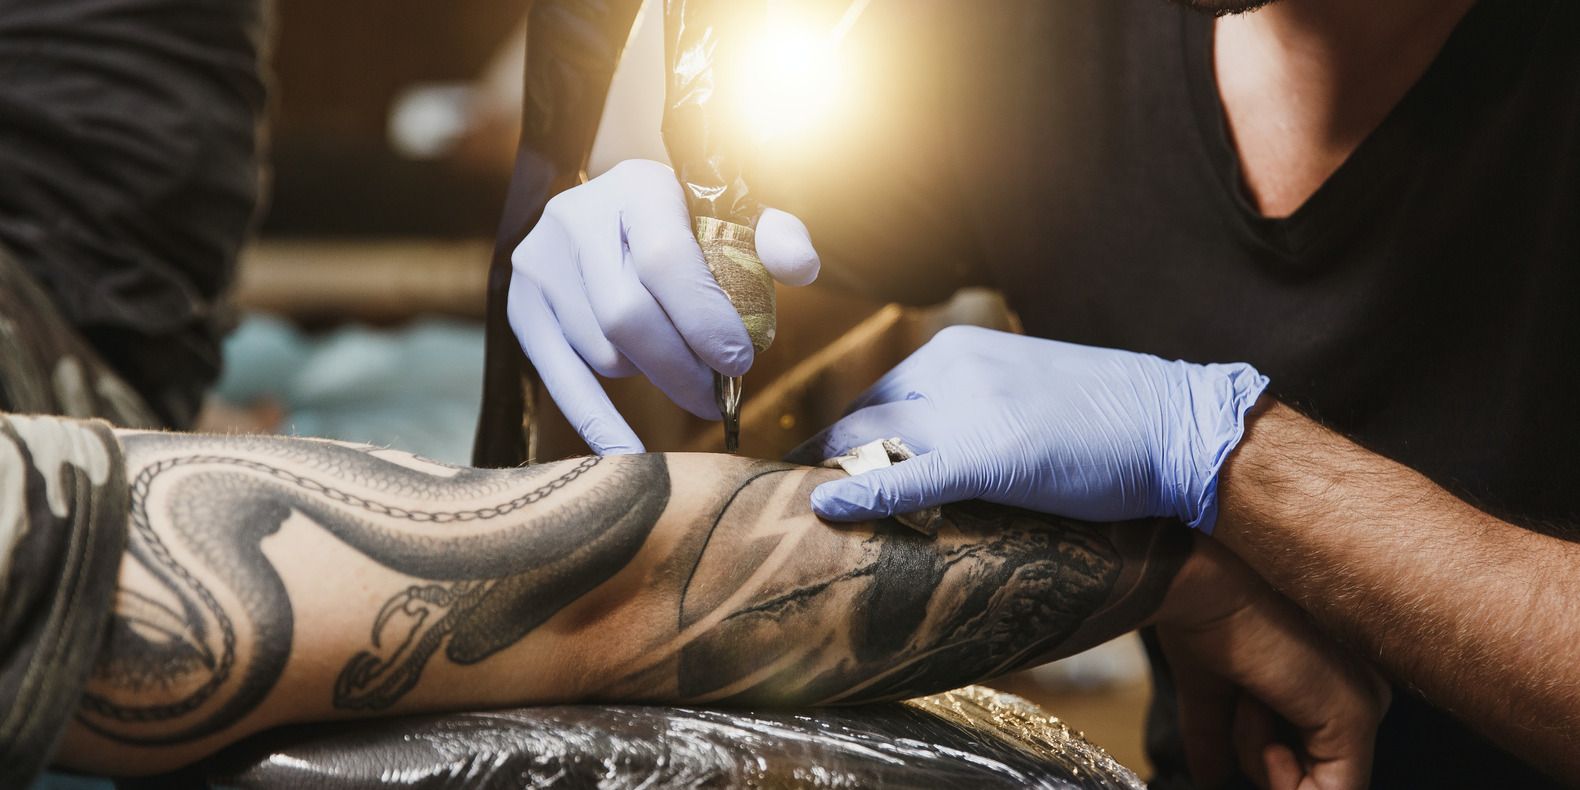 Tattooing and 3D Printing: Is There A Connection?